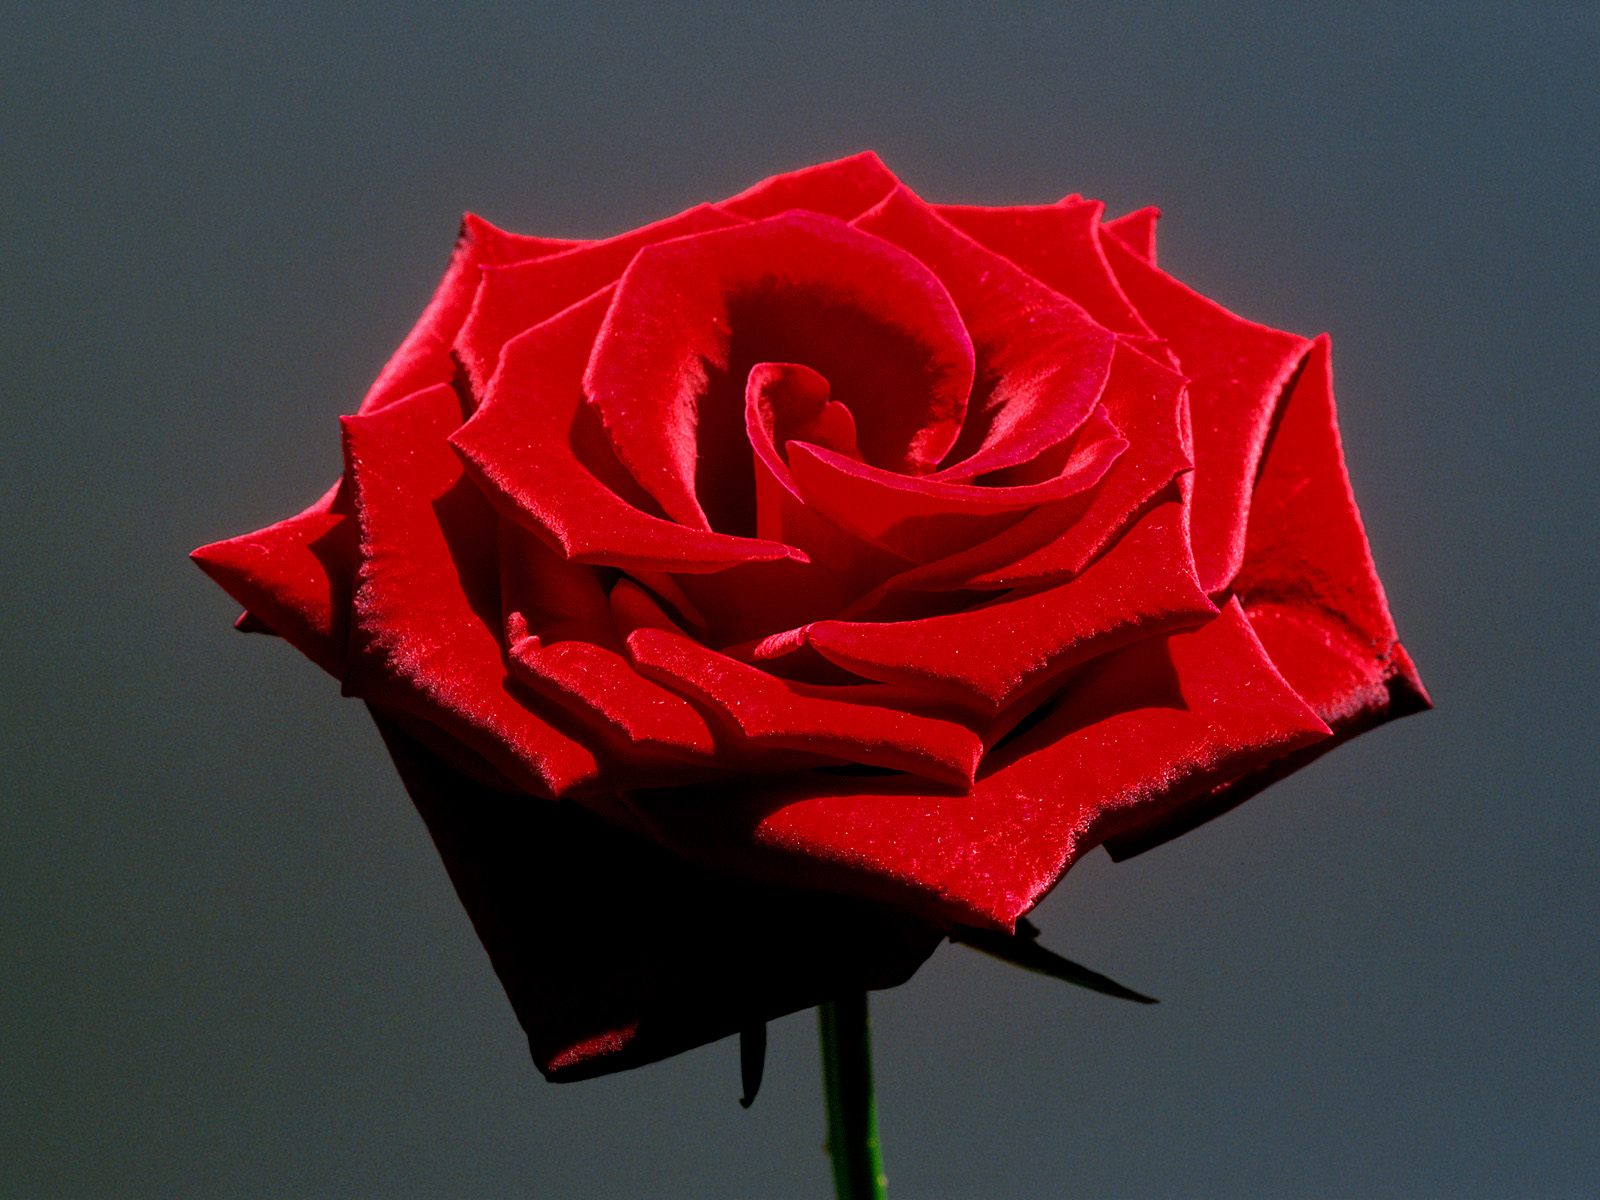 Free HQ Red Rose Wallpaper   Free HQ Wallpapers